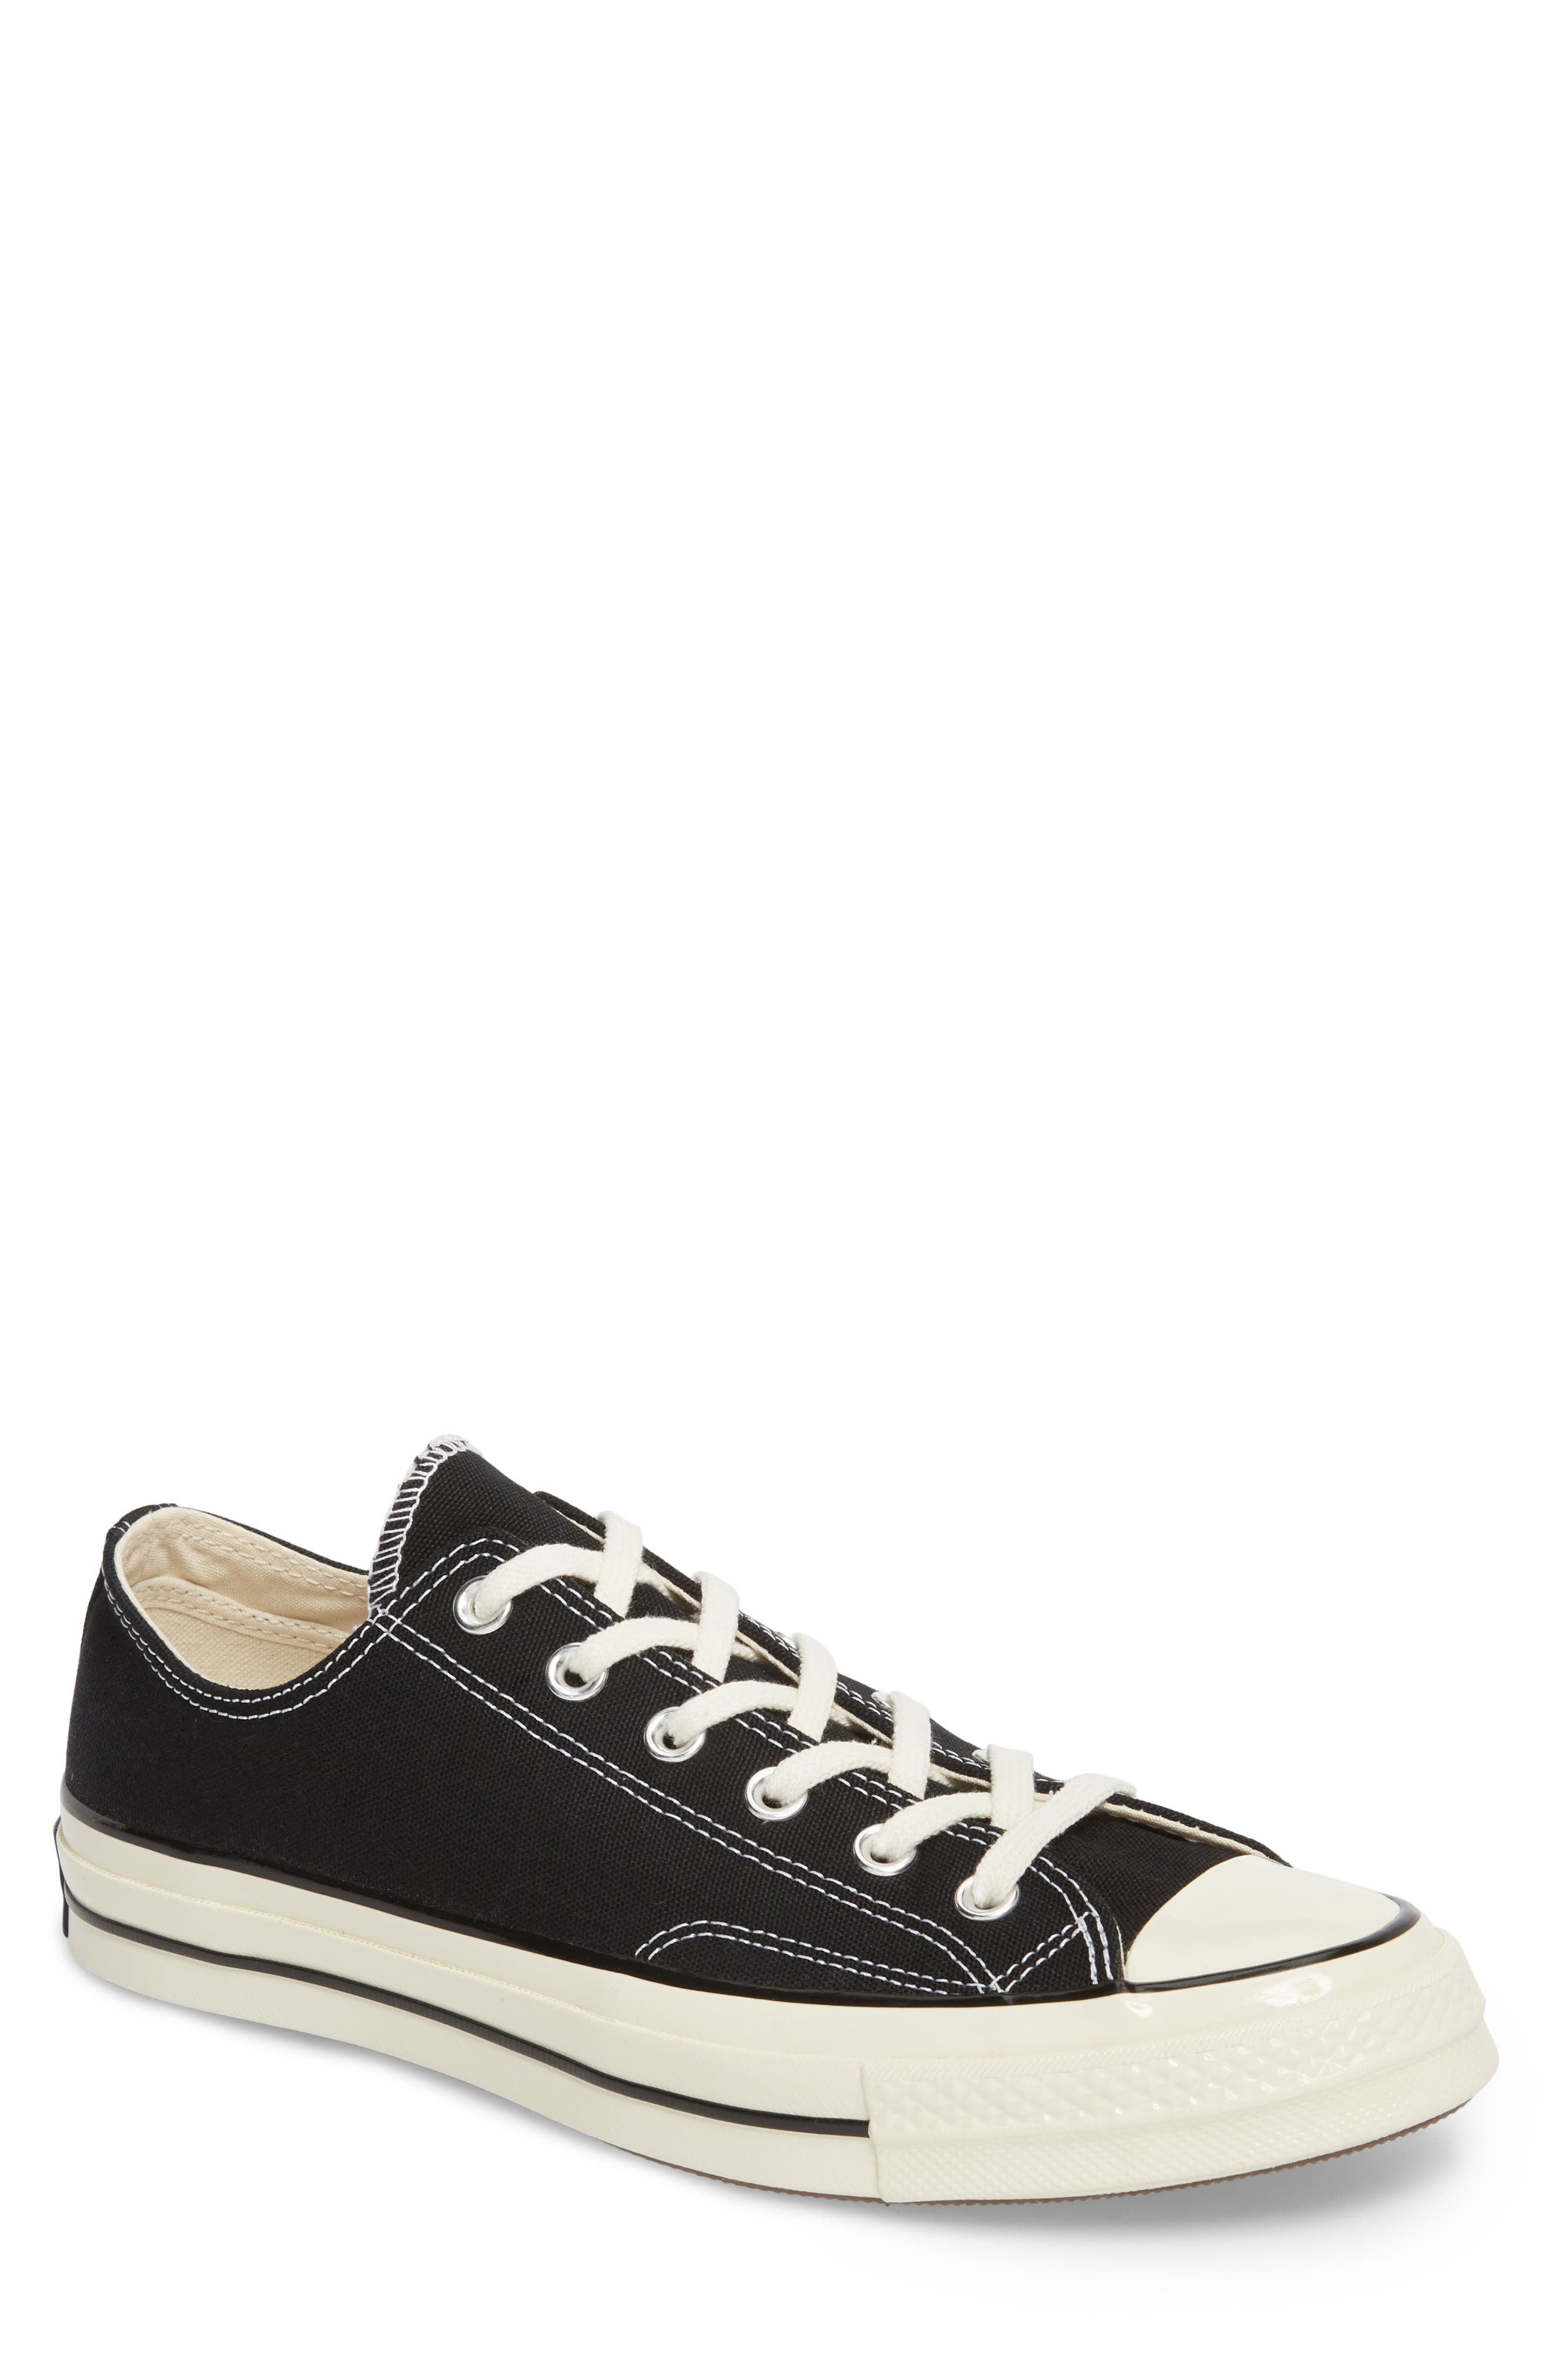 converse chuck taylor 70s low